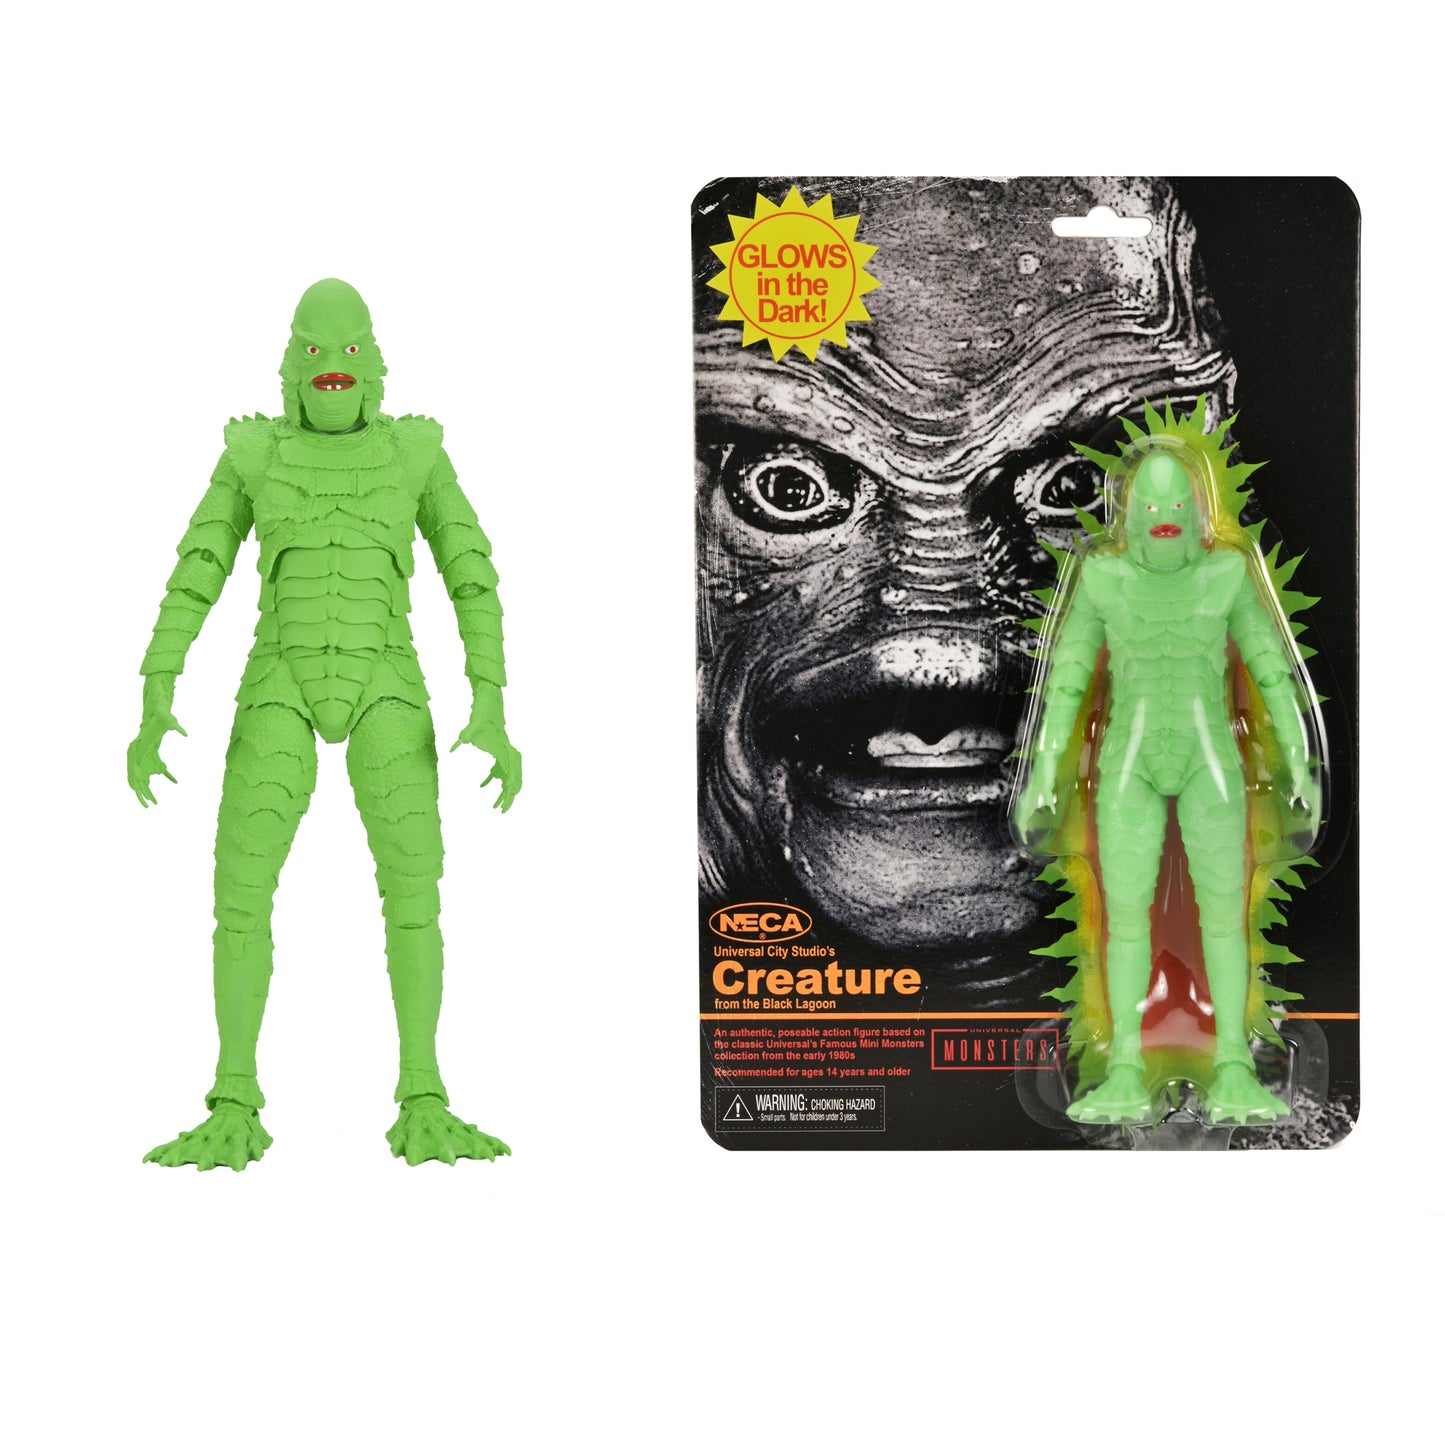 Universal Monsters The Creature of The Black Lagoon SDCC23 EXCLUSIVA